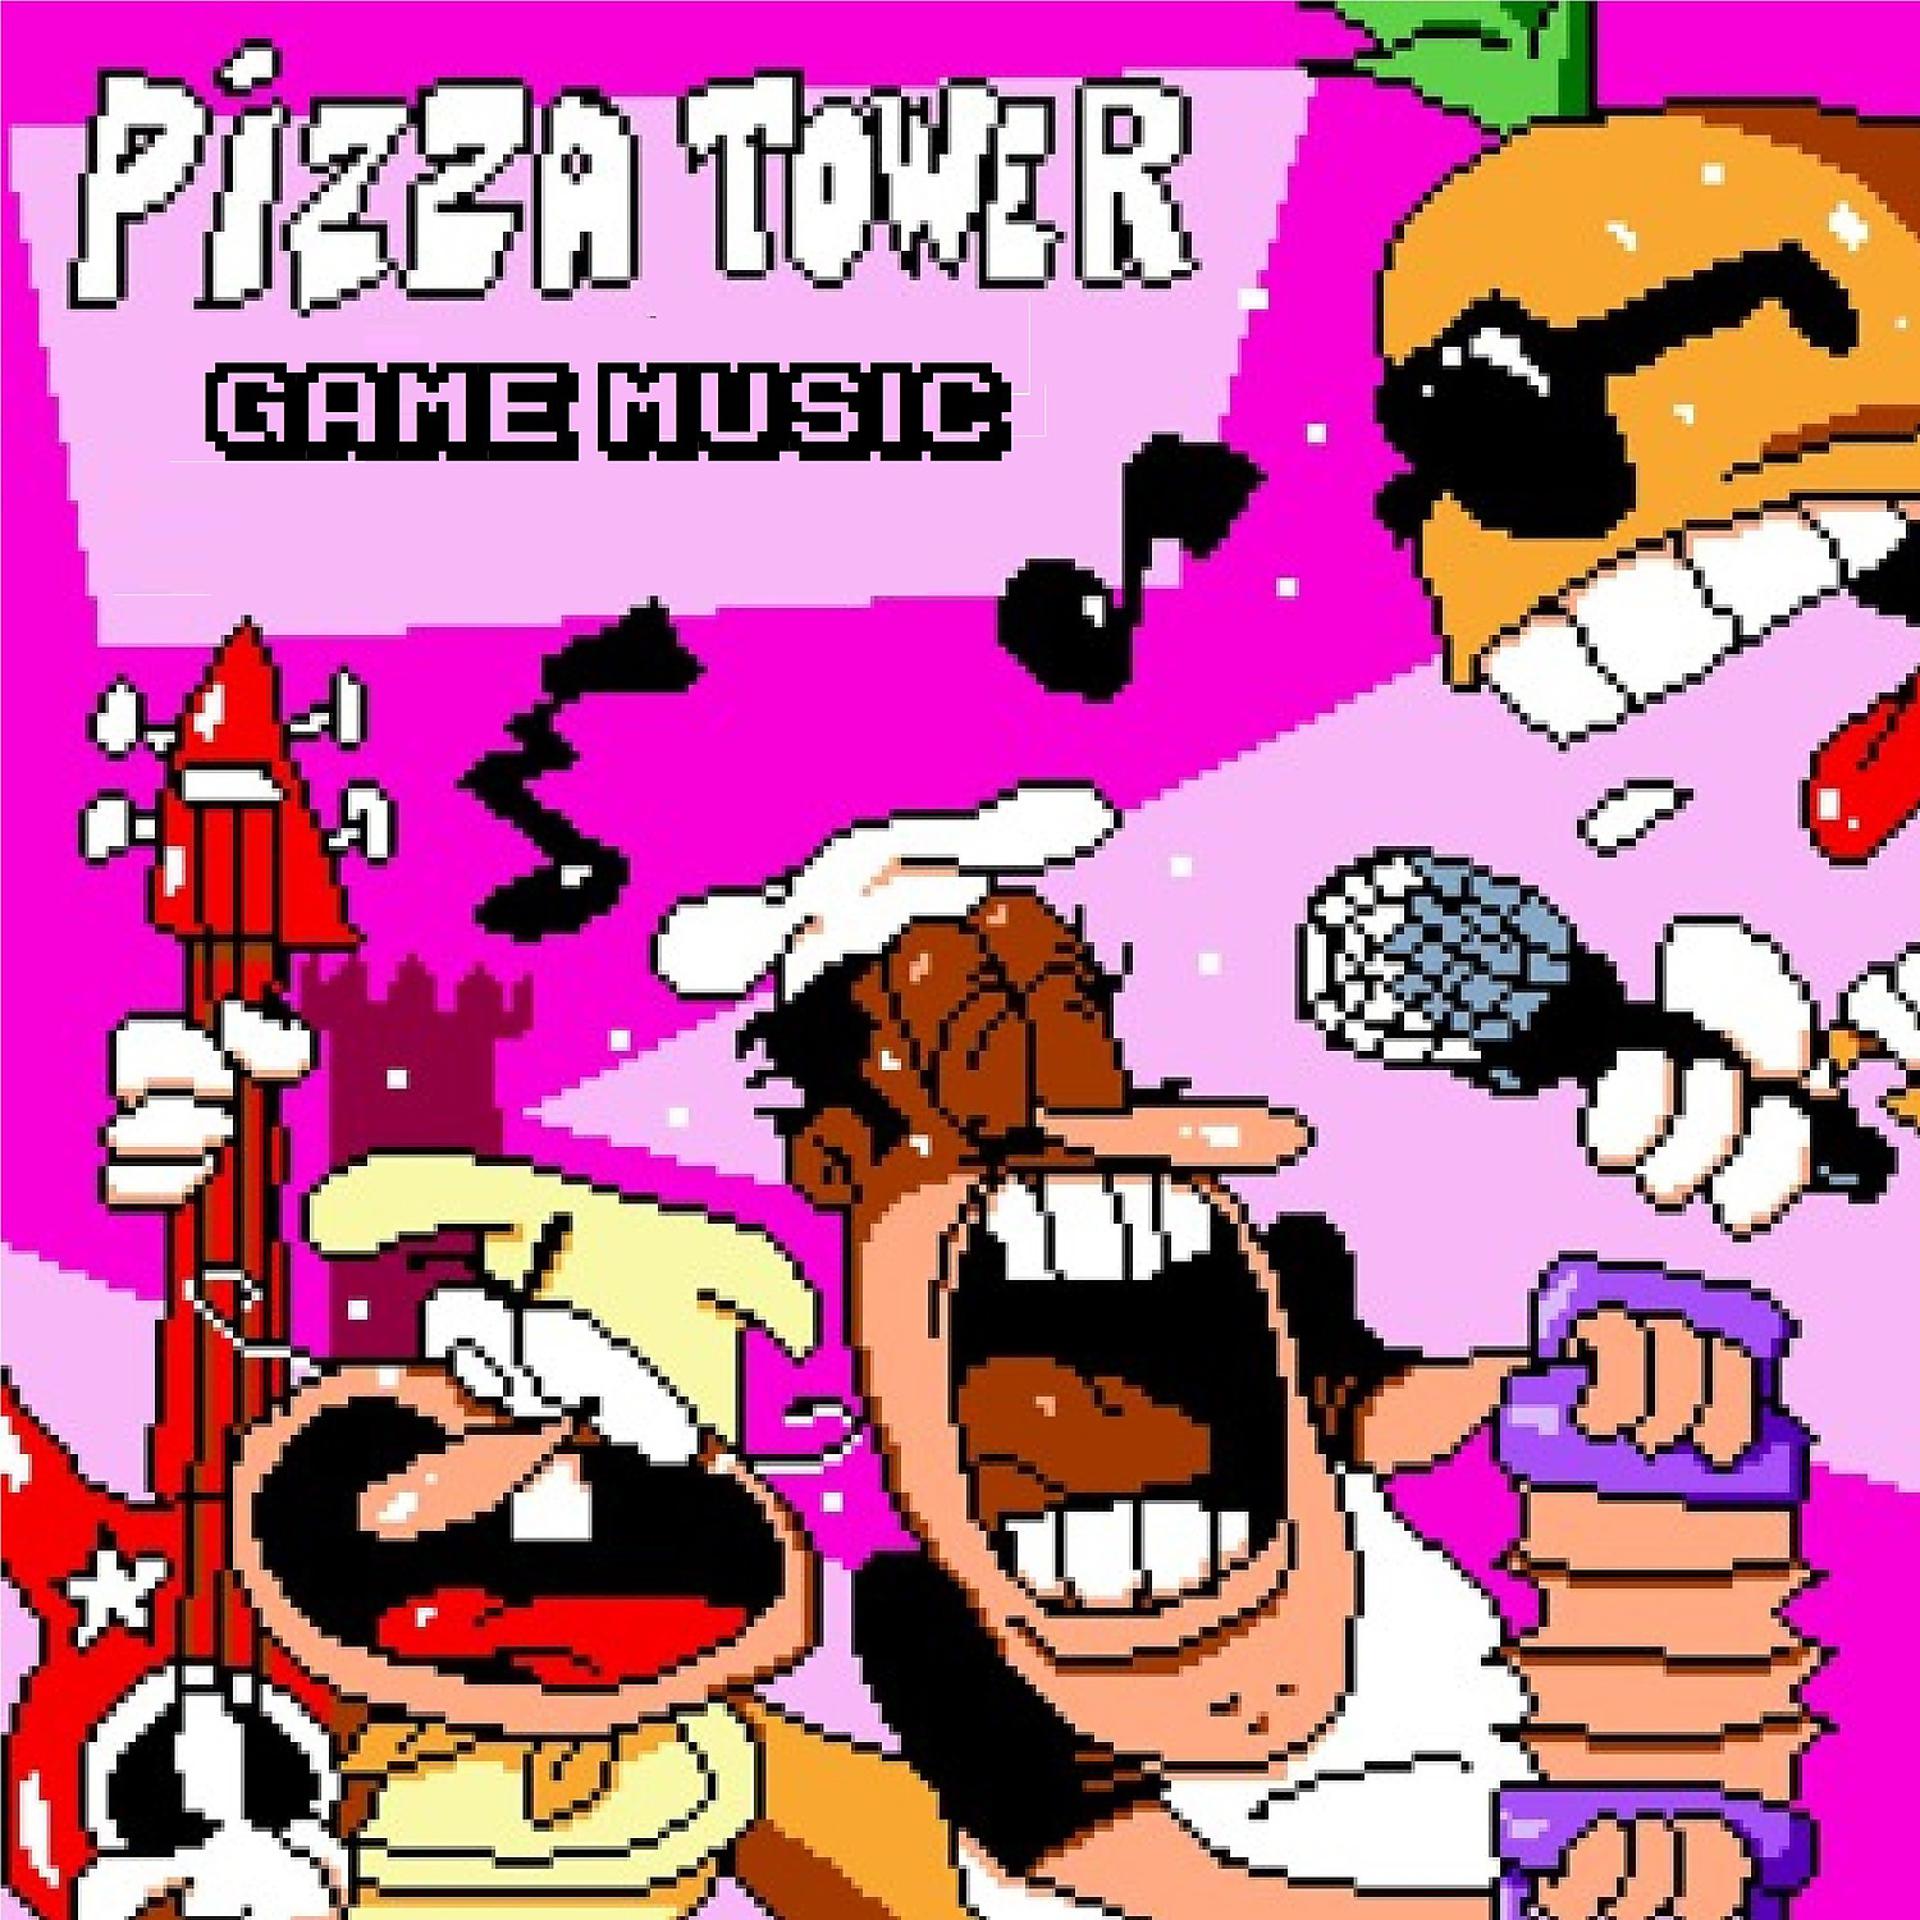 Пицца тавер 1.1. Pizza Tower OST. Pizza Tower русская версия. Peppino pizza Tower. Pizza Tower игра.